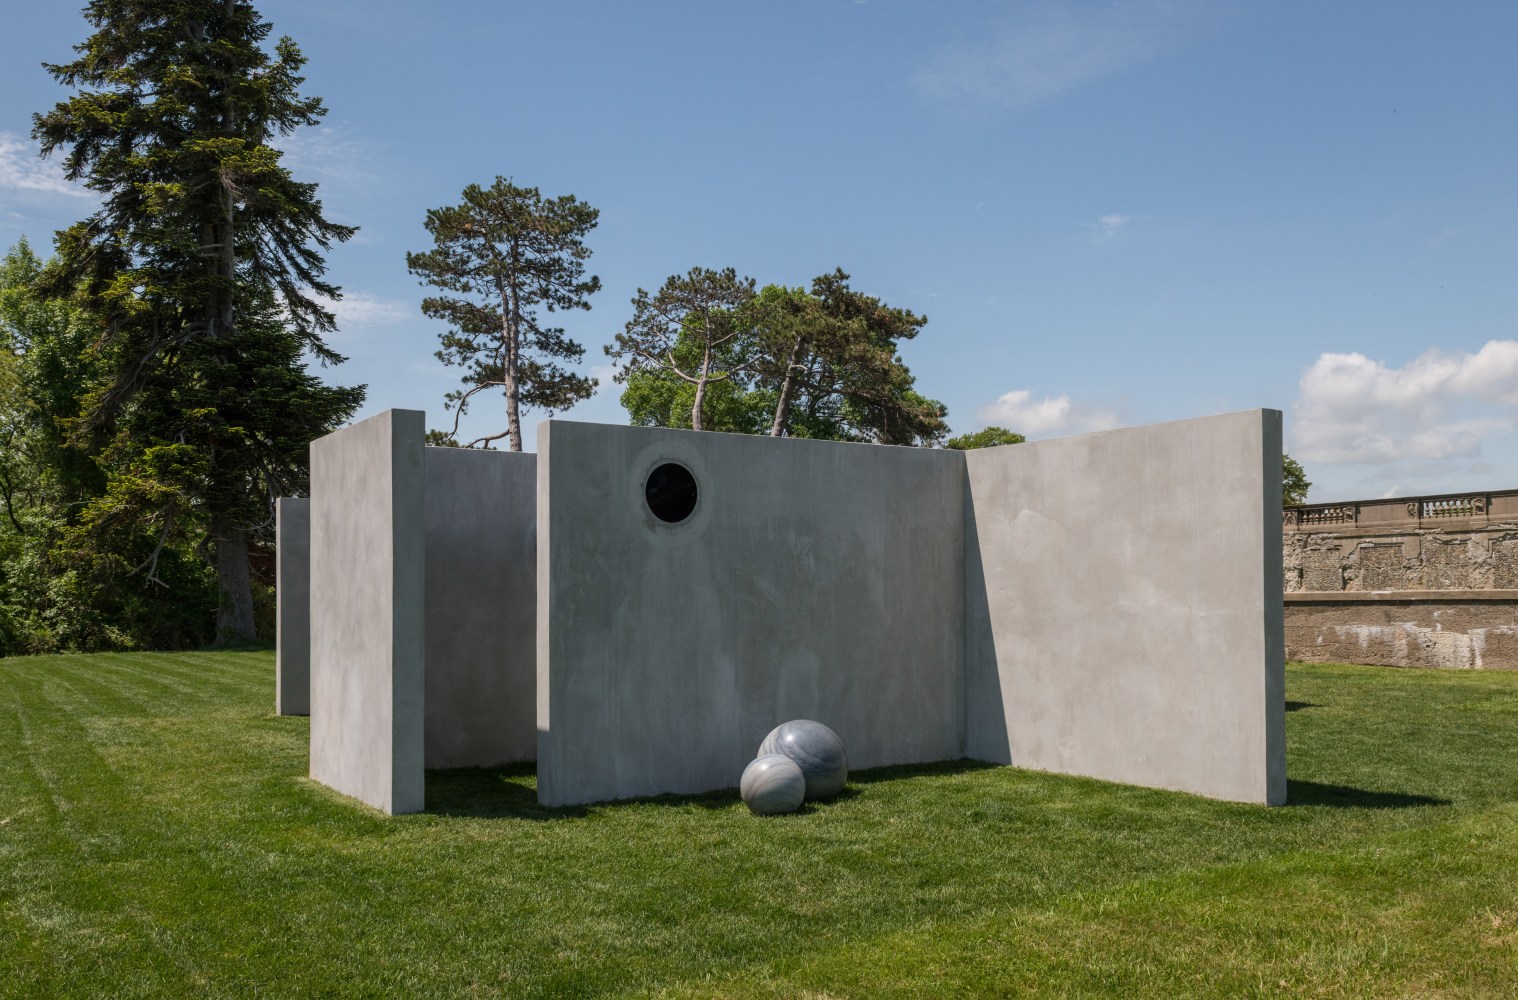 Alicja Kwade
TunnelTeller, 2018
Stainless steel, concrete, natural stone (Macauba azul)
Site specific installation for The Trustees&amp;rsquo; Castle Hill on the Crane Estate
Photo: Peter Vanderwarker Photography

&amp;nbsp;